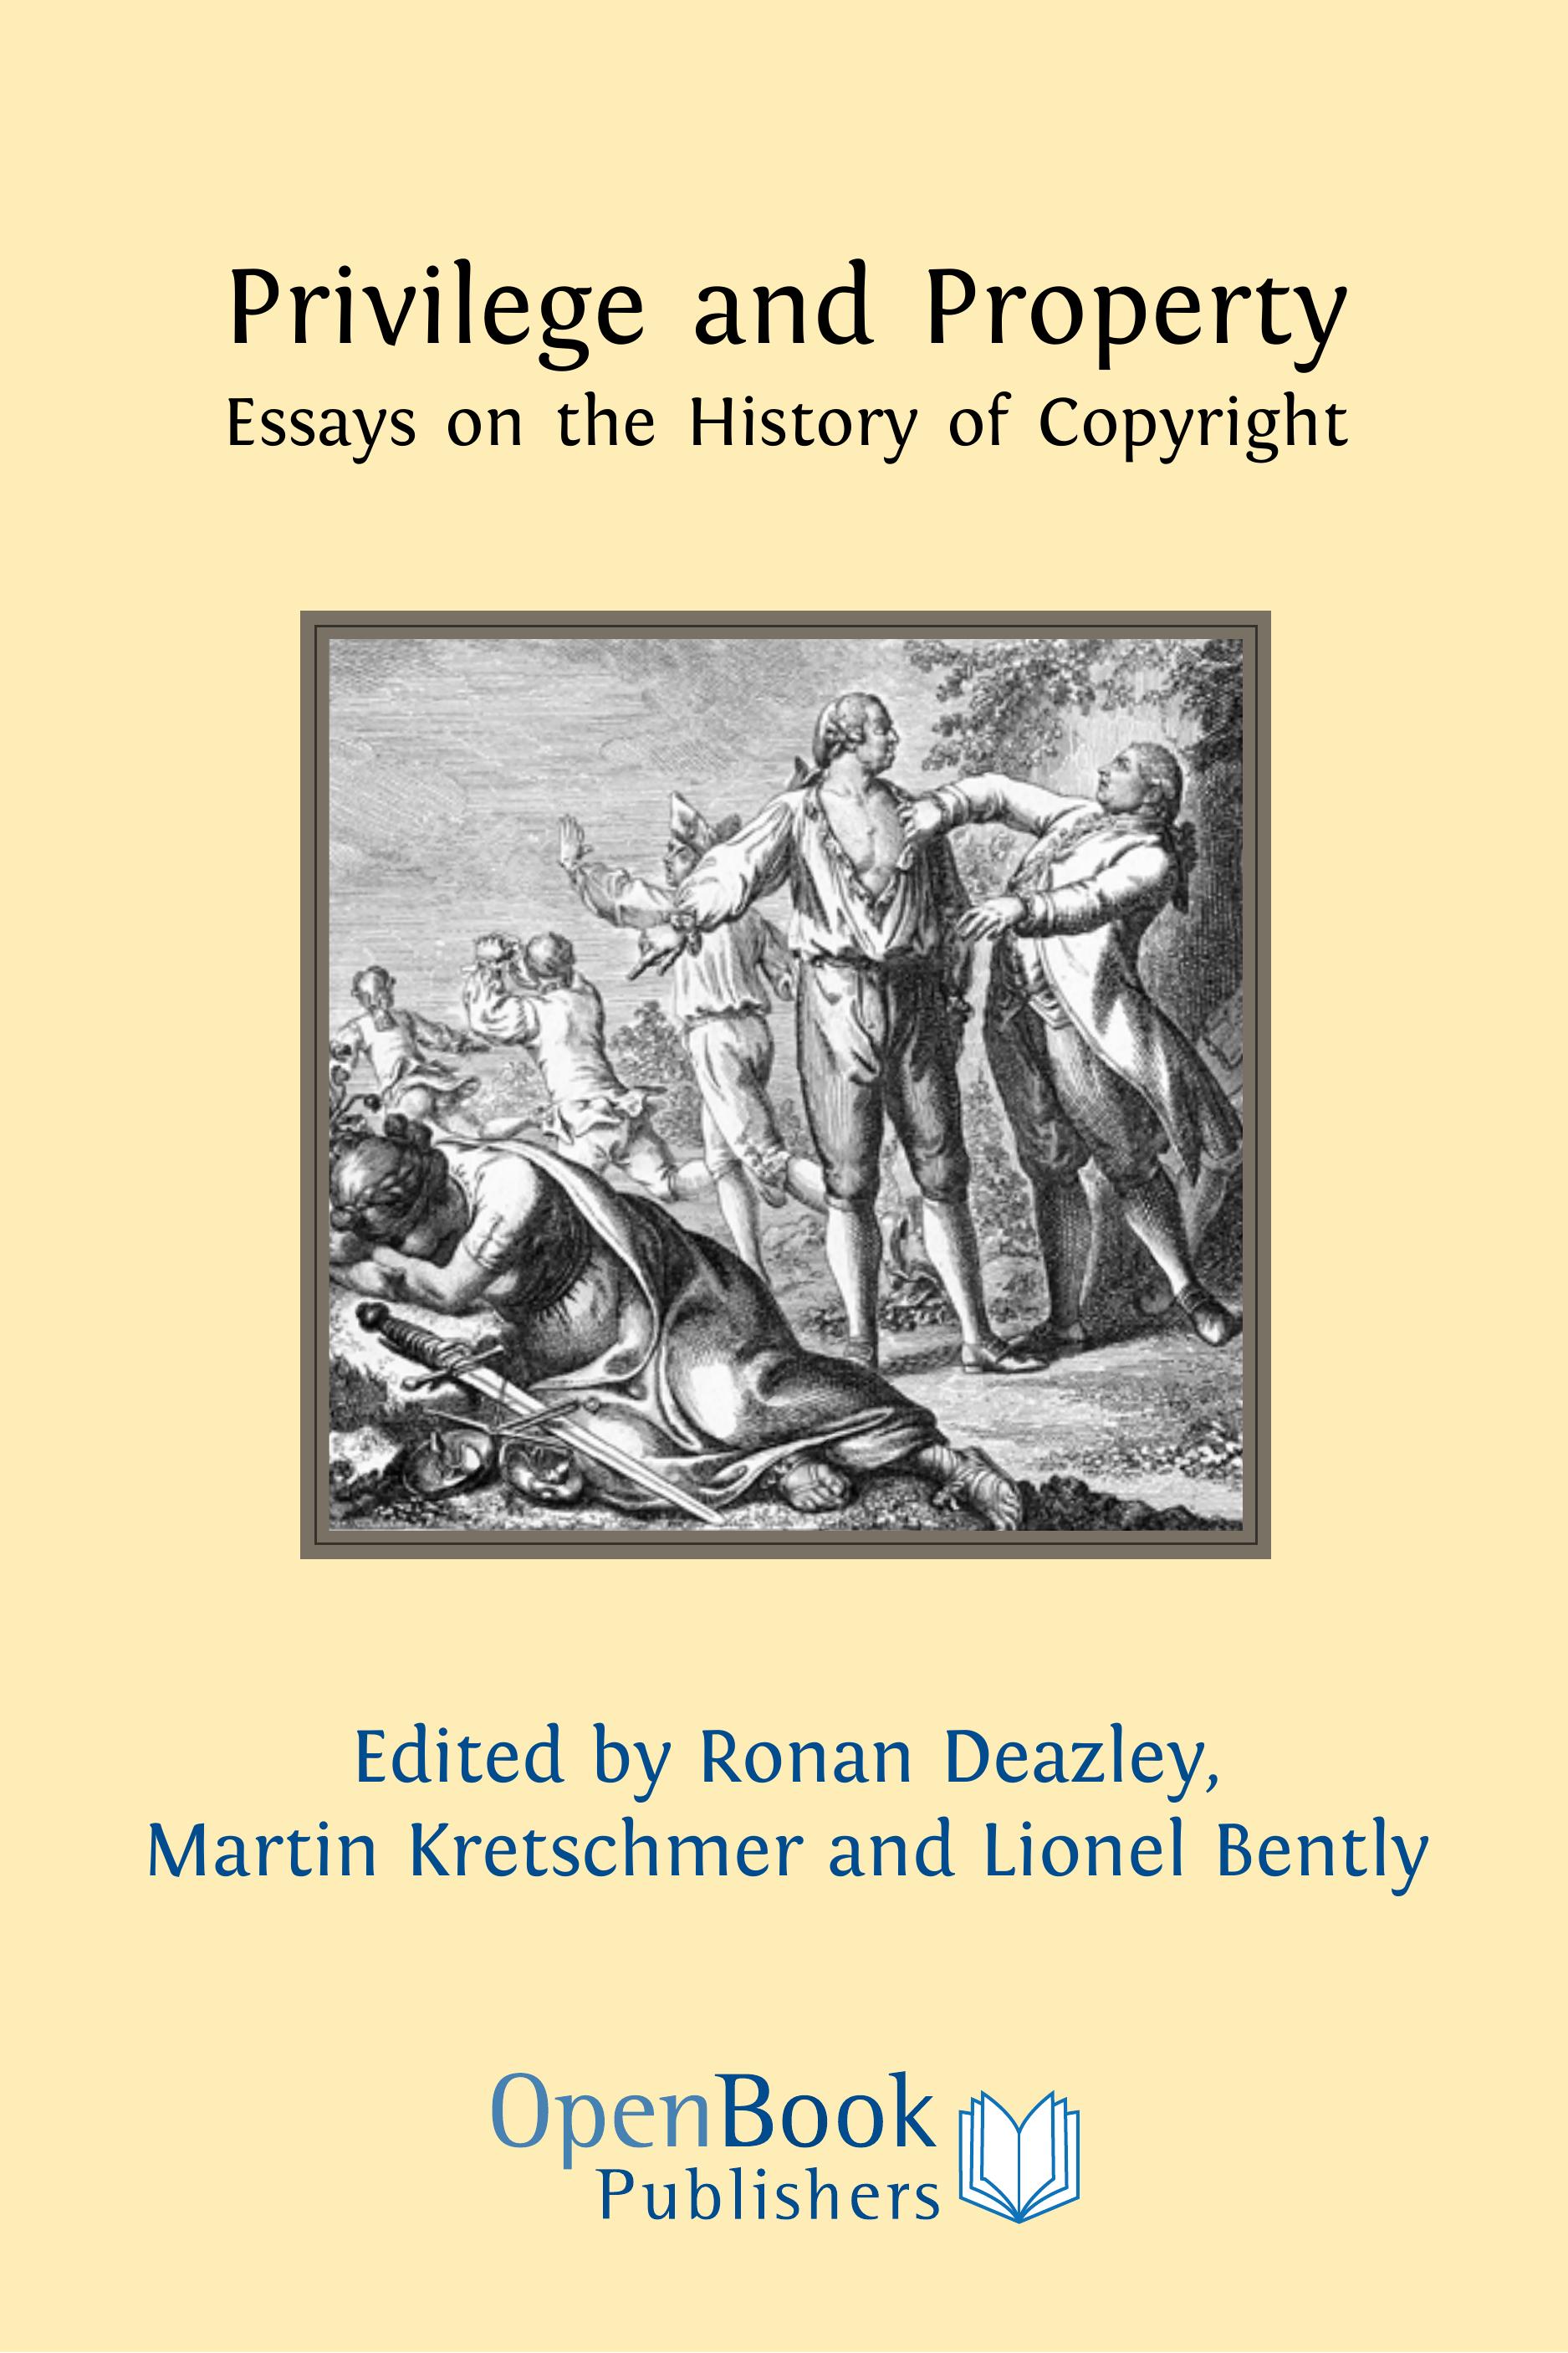 Privilege and Property: Essays on the History of Copyright